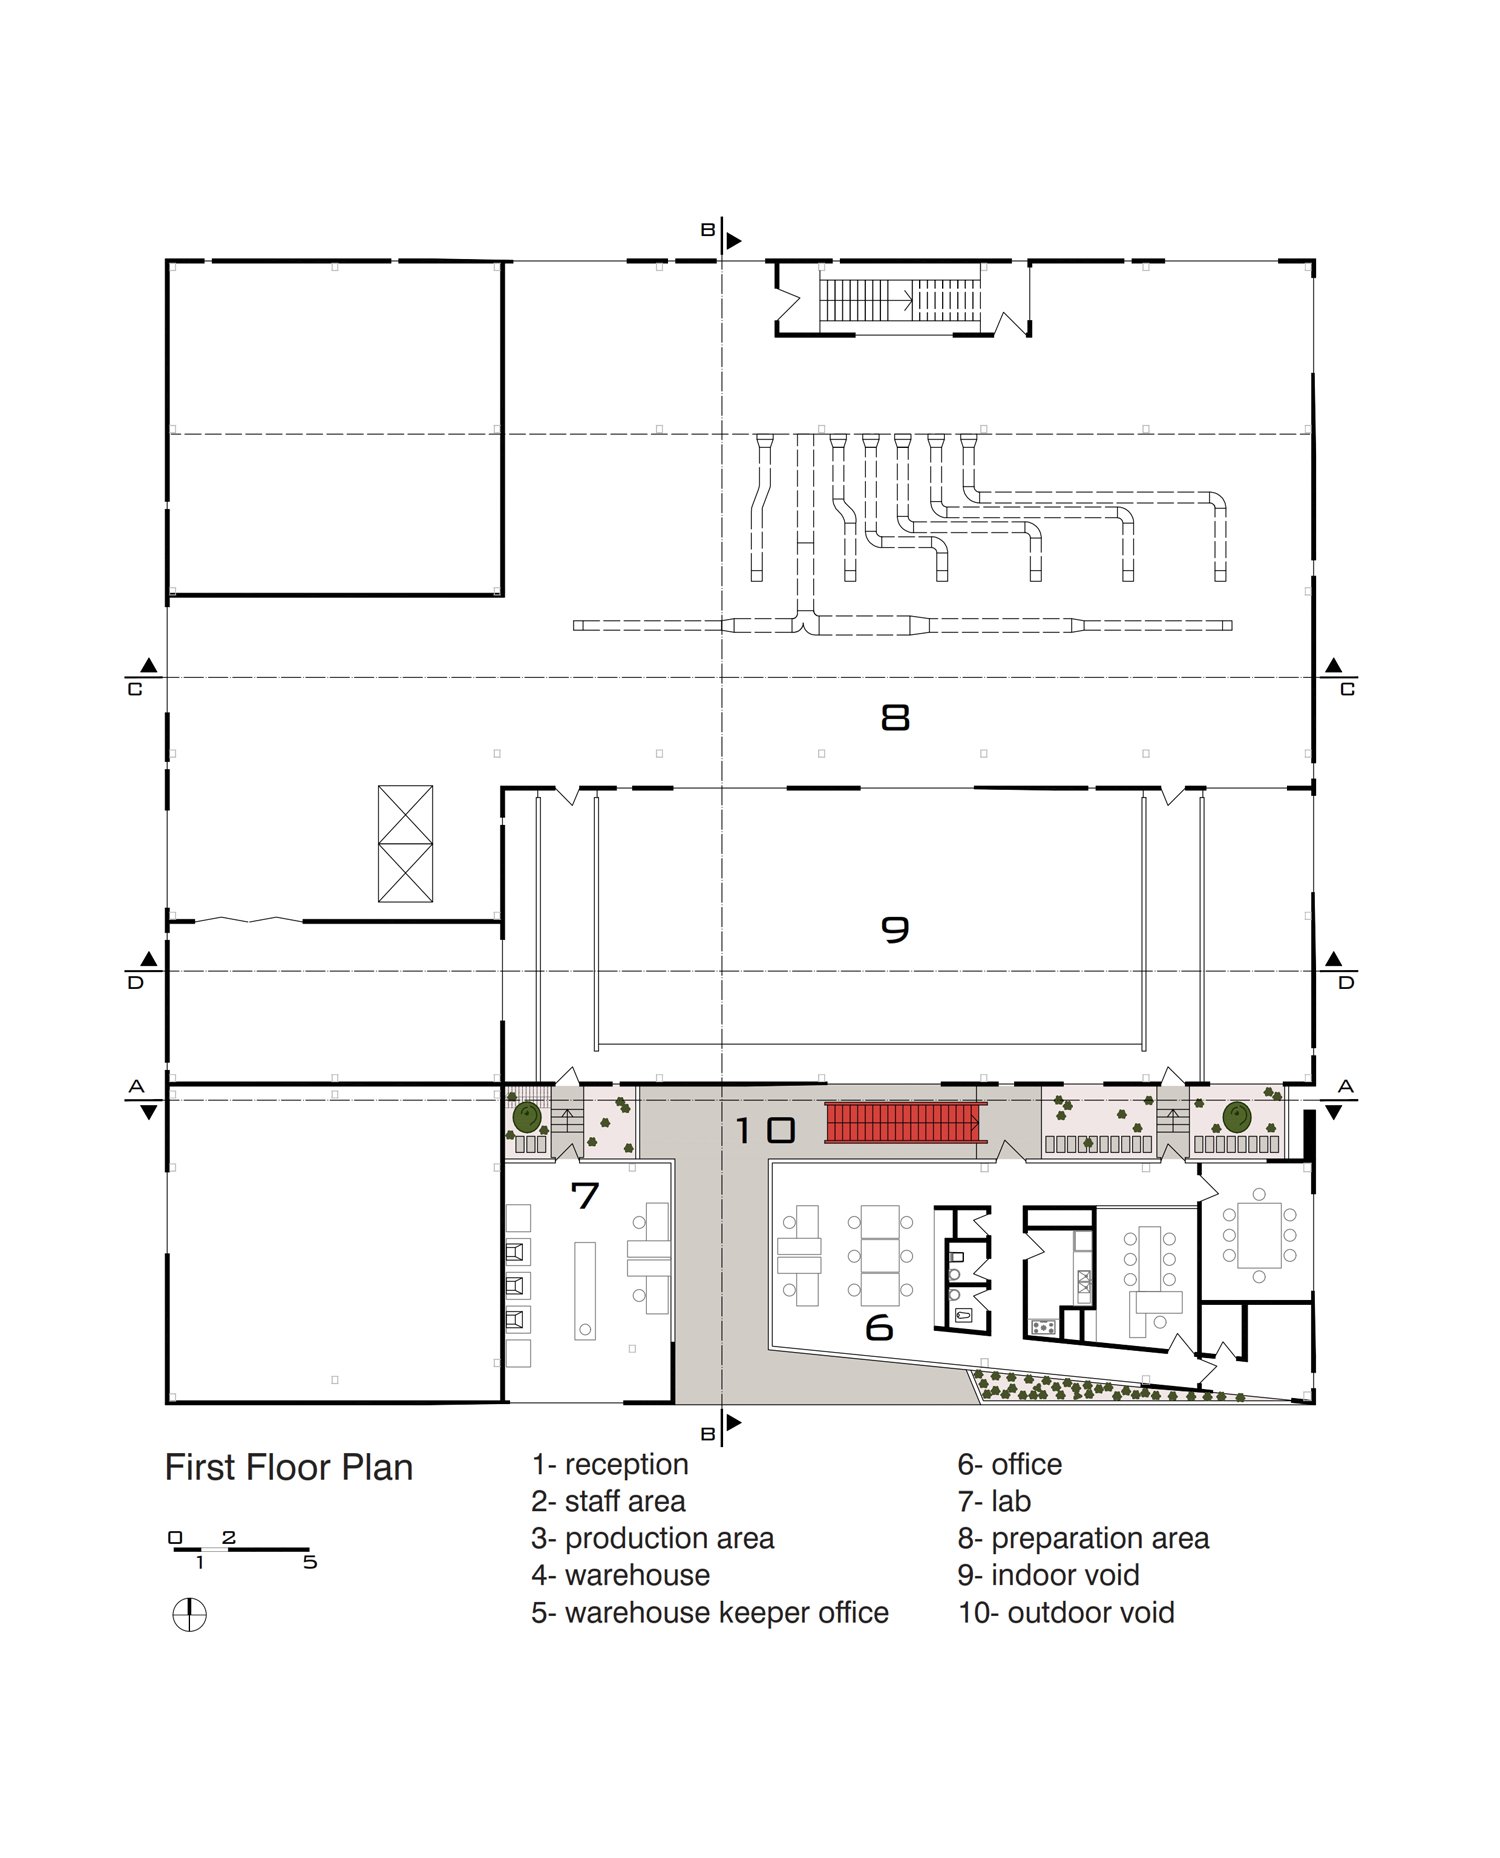 First Floor Plan | Overall Site Plan